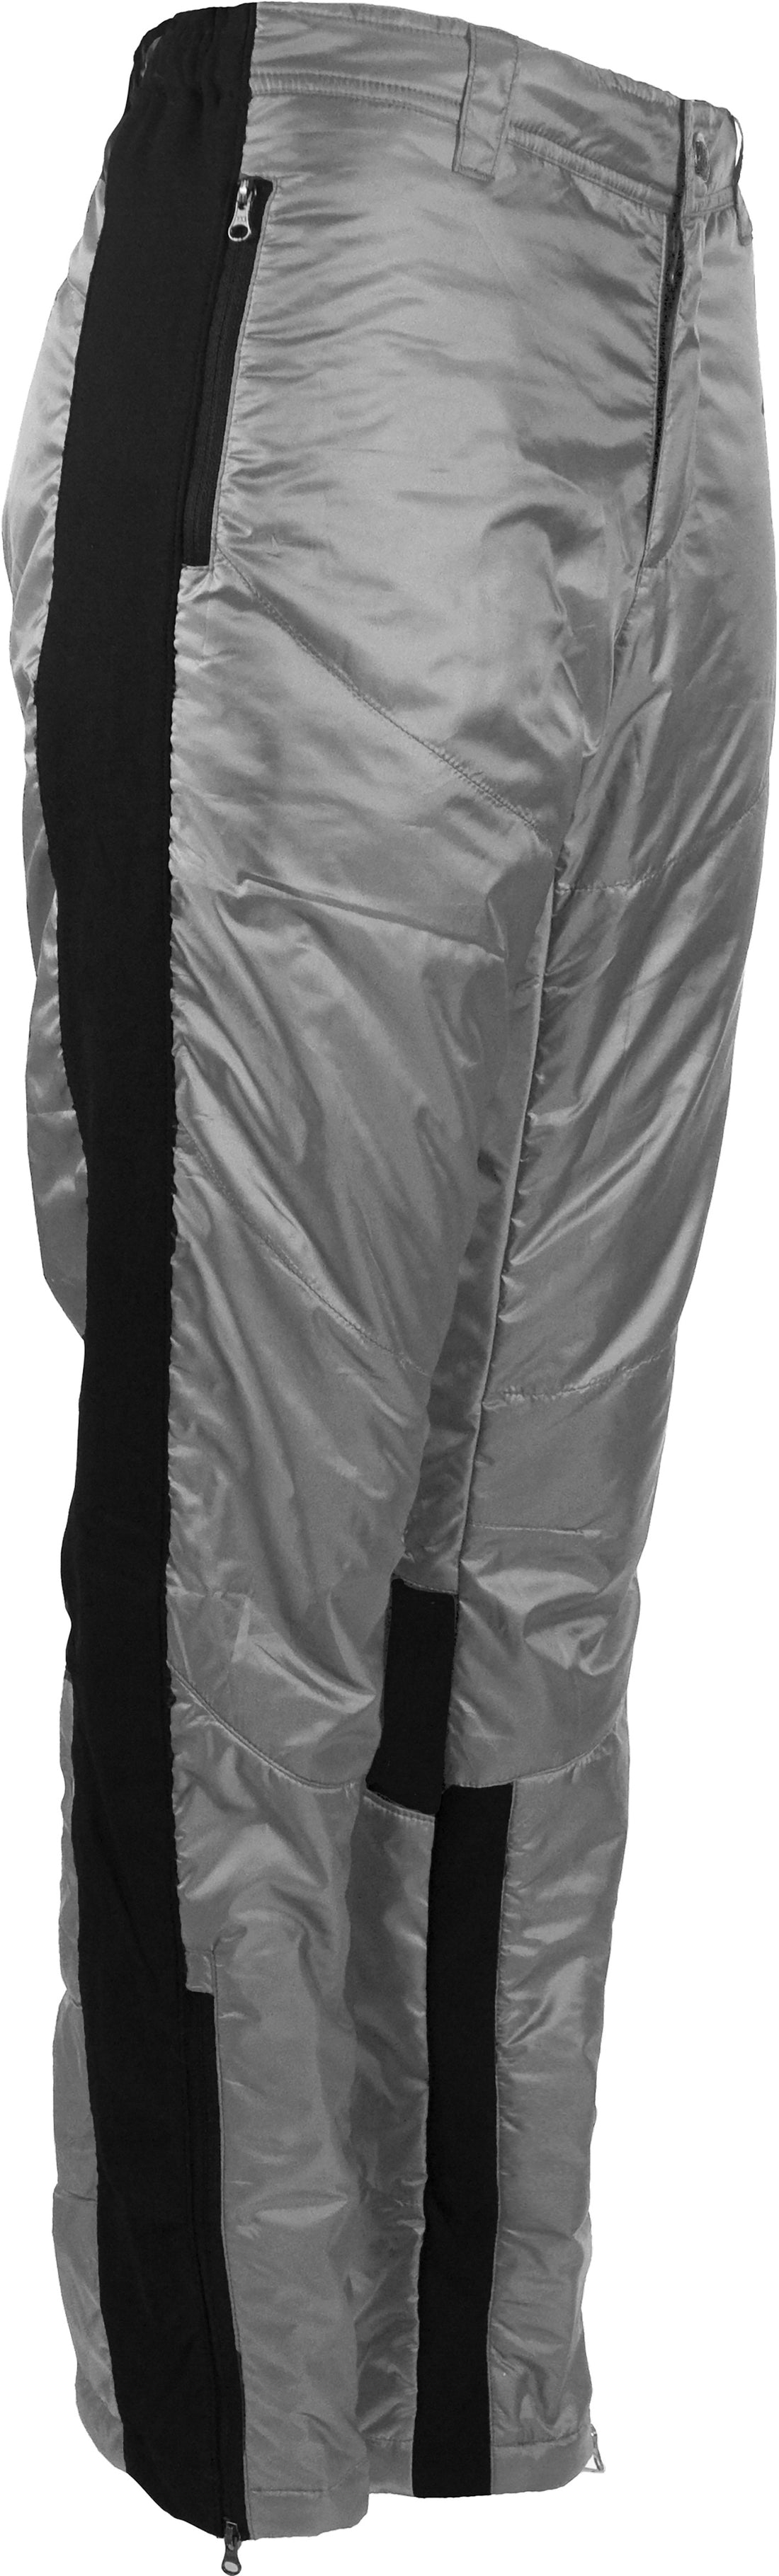 skhoop insulated aluu pants in graphite, side view